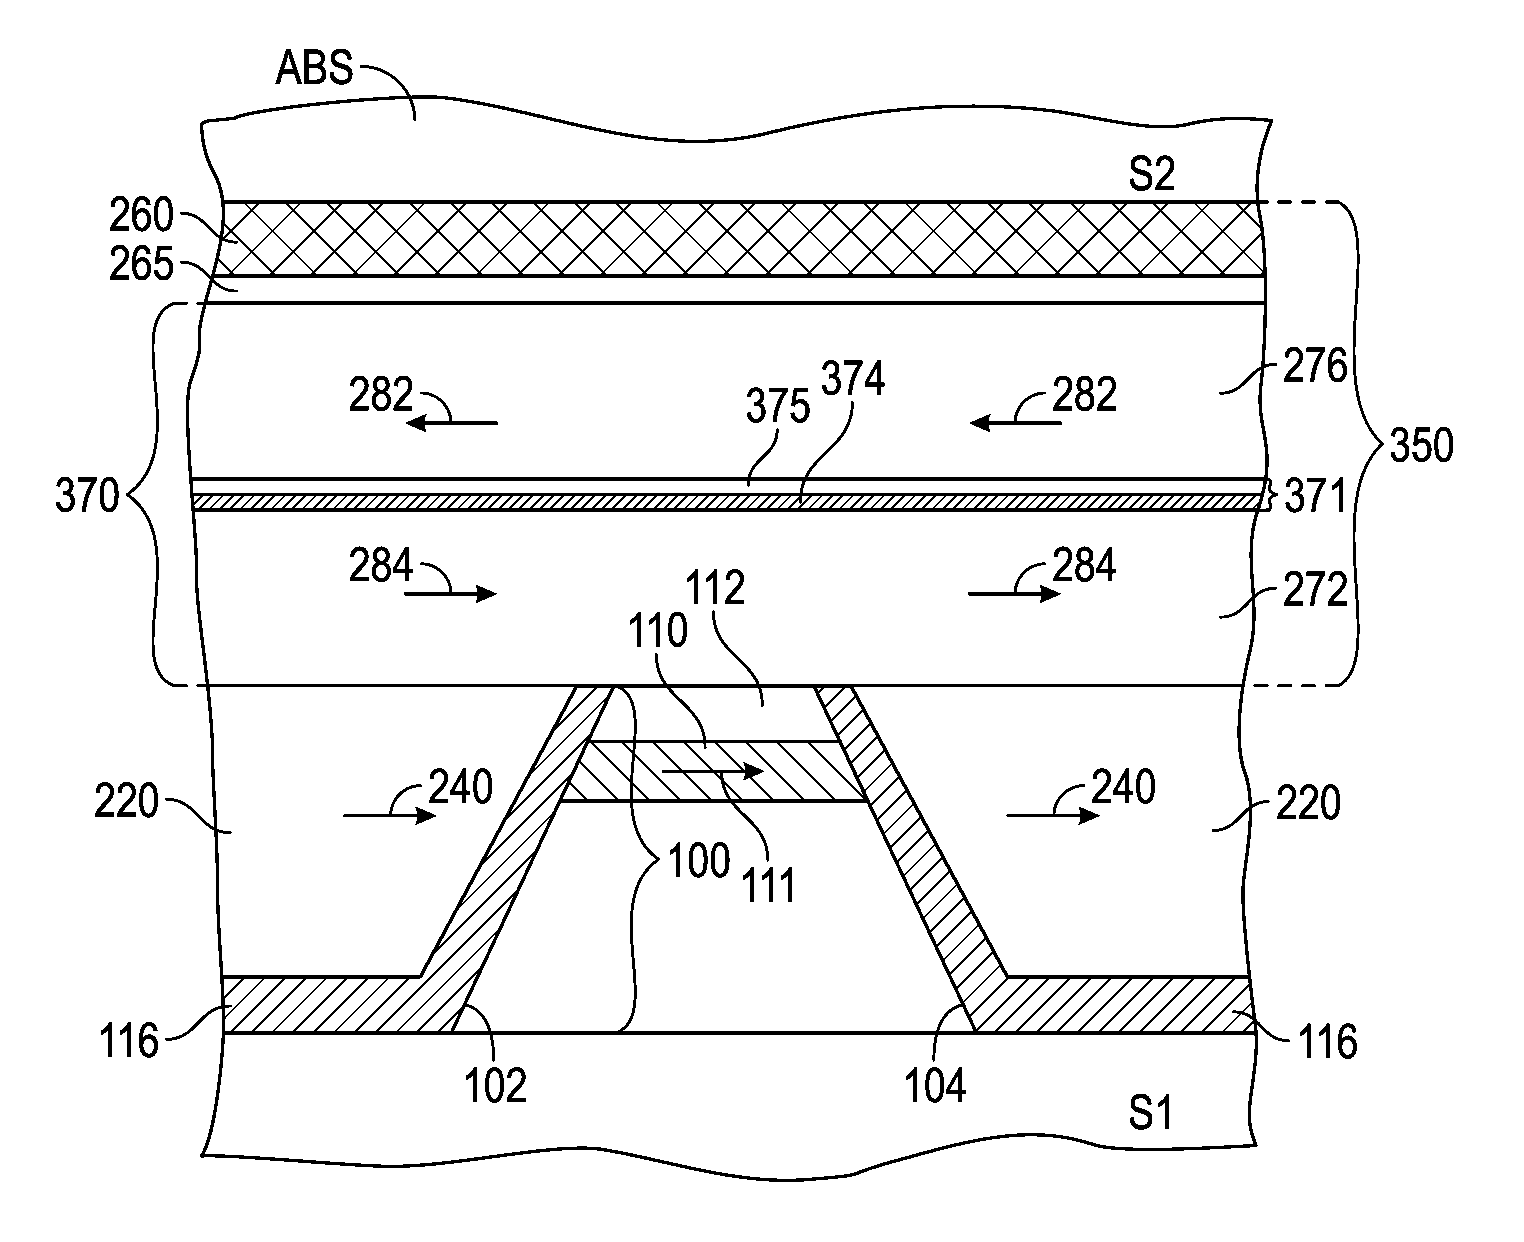 Current-perpendicular-to-the-plane (CPP) magnetoresistive (MR) sensor with side shields and an antiparallel structure top shield